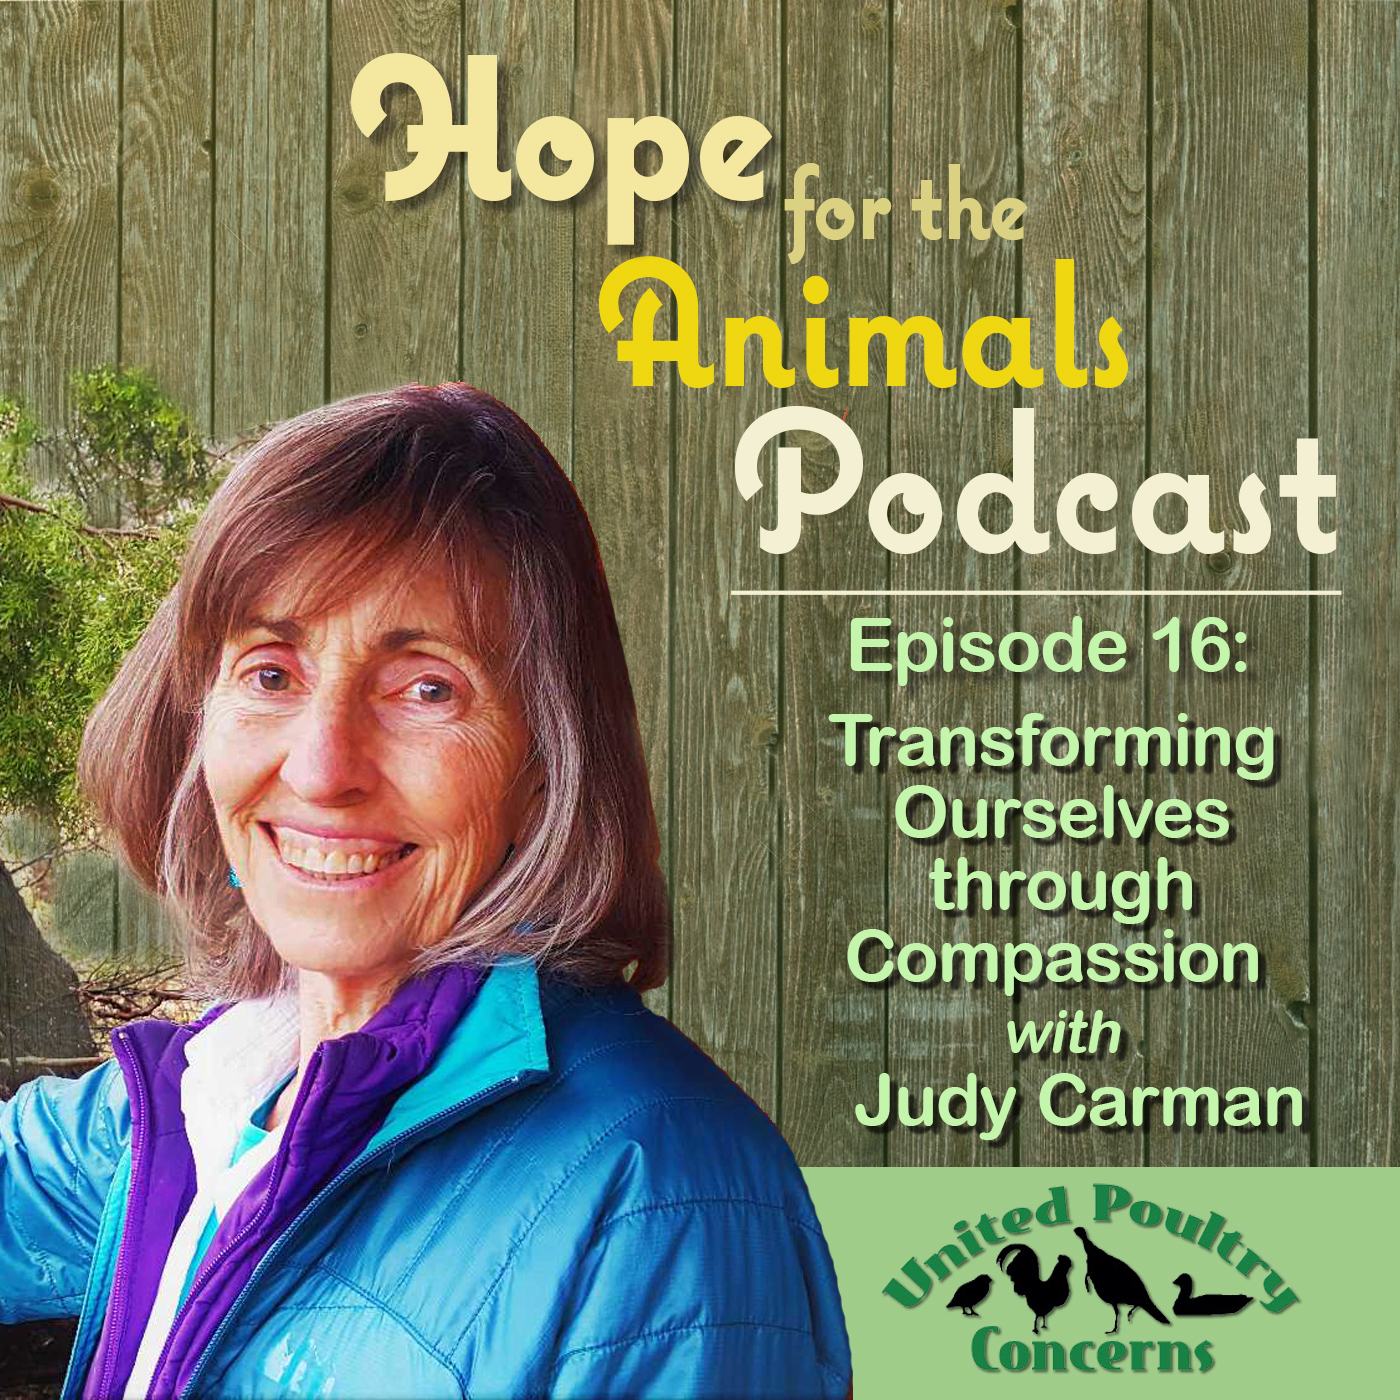 Episode 16: Transforming Ourselves Through Compassion with Judy Carman